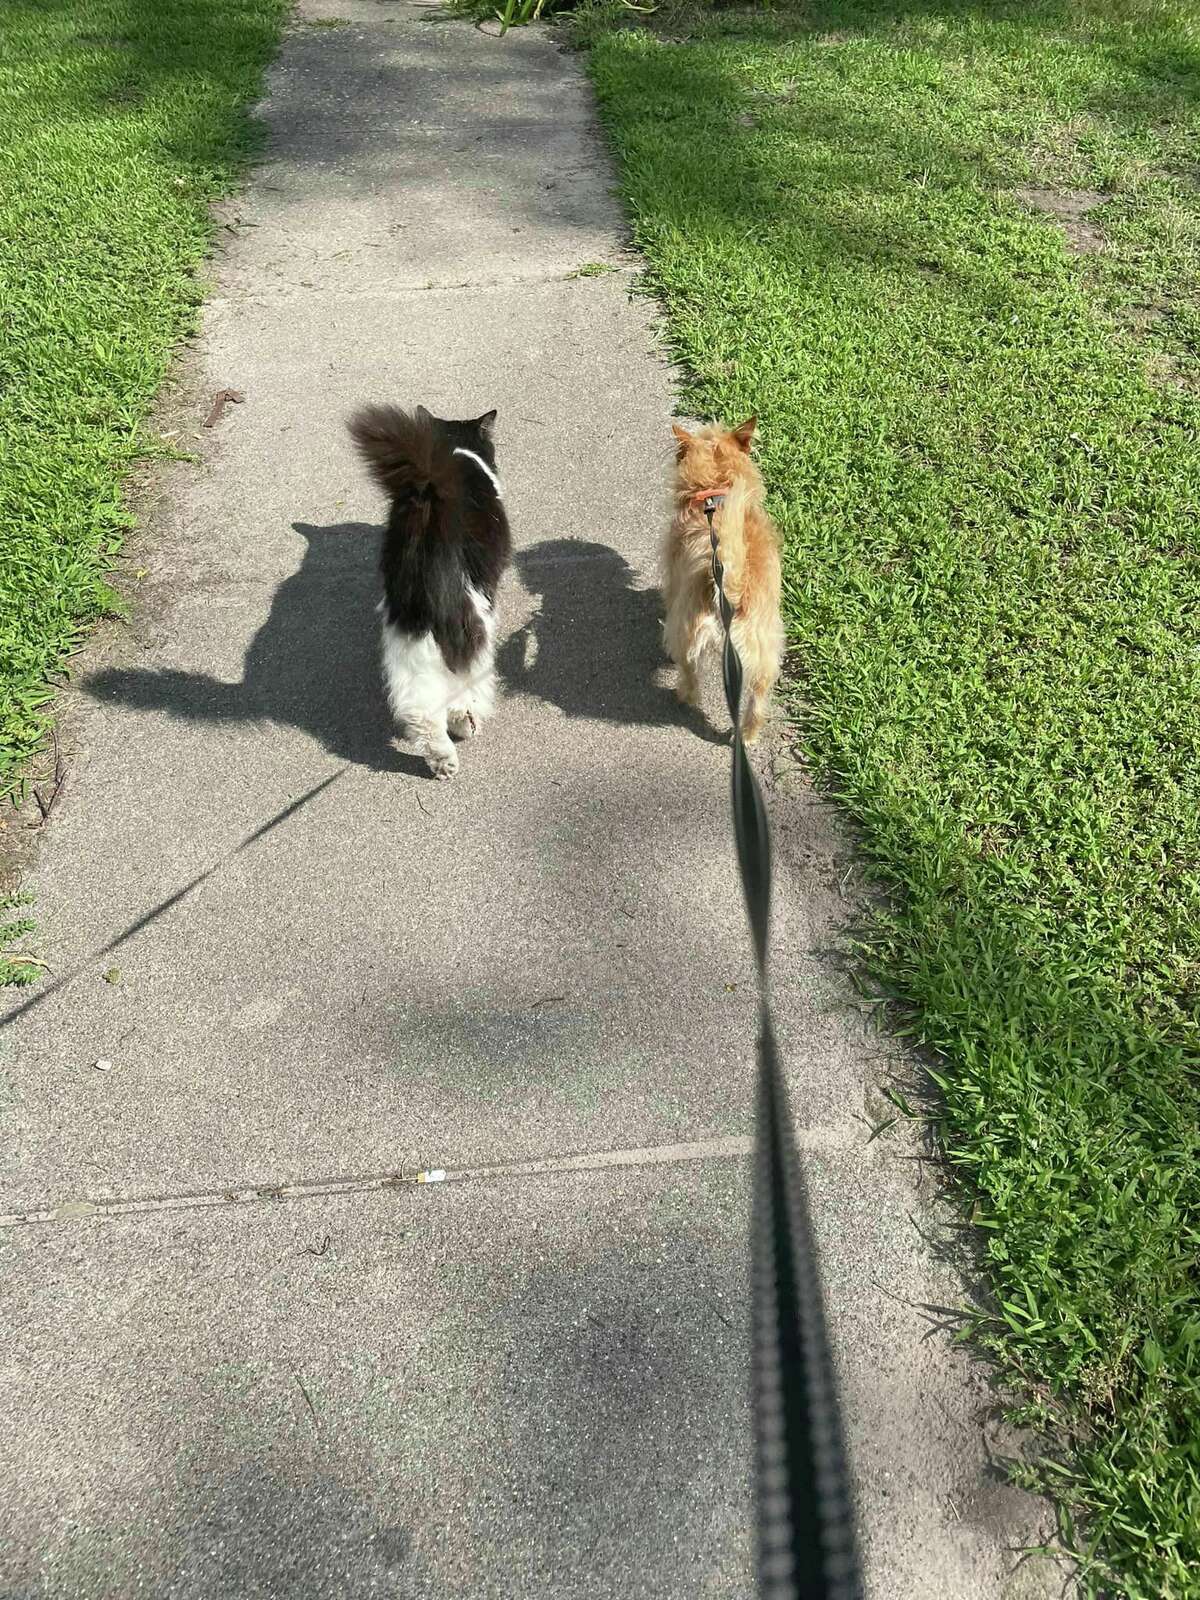 Nick the Cat and Josie LaVier, a fetching Chihuahua and shih tzu mix, take a stroll together on Grove Street in Midland.